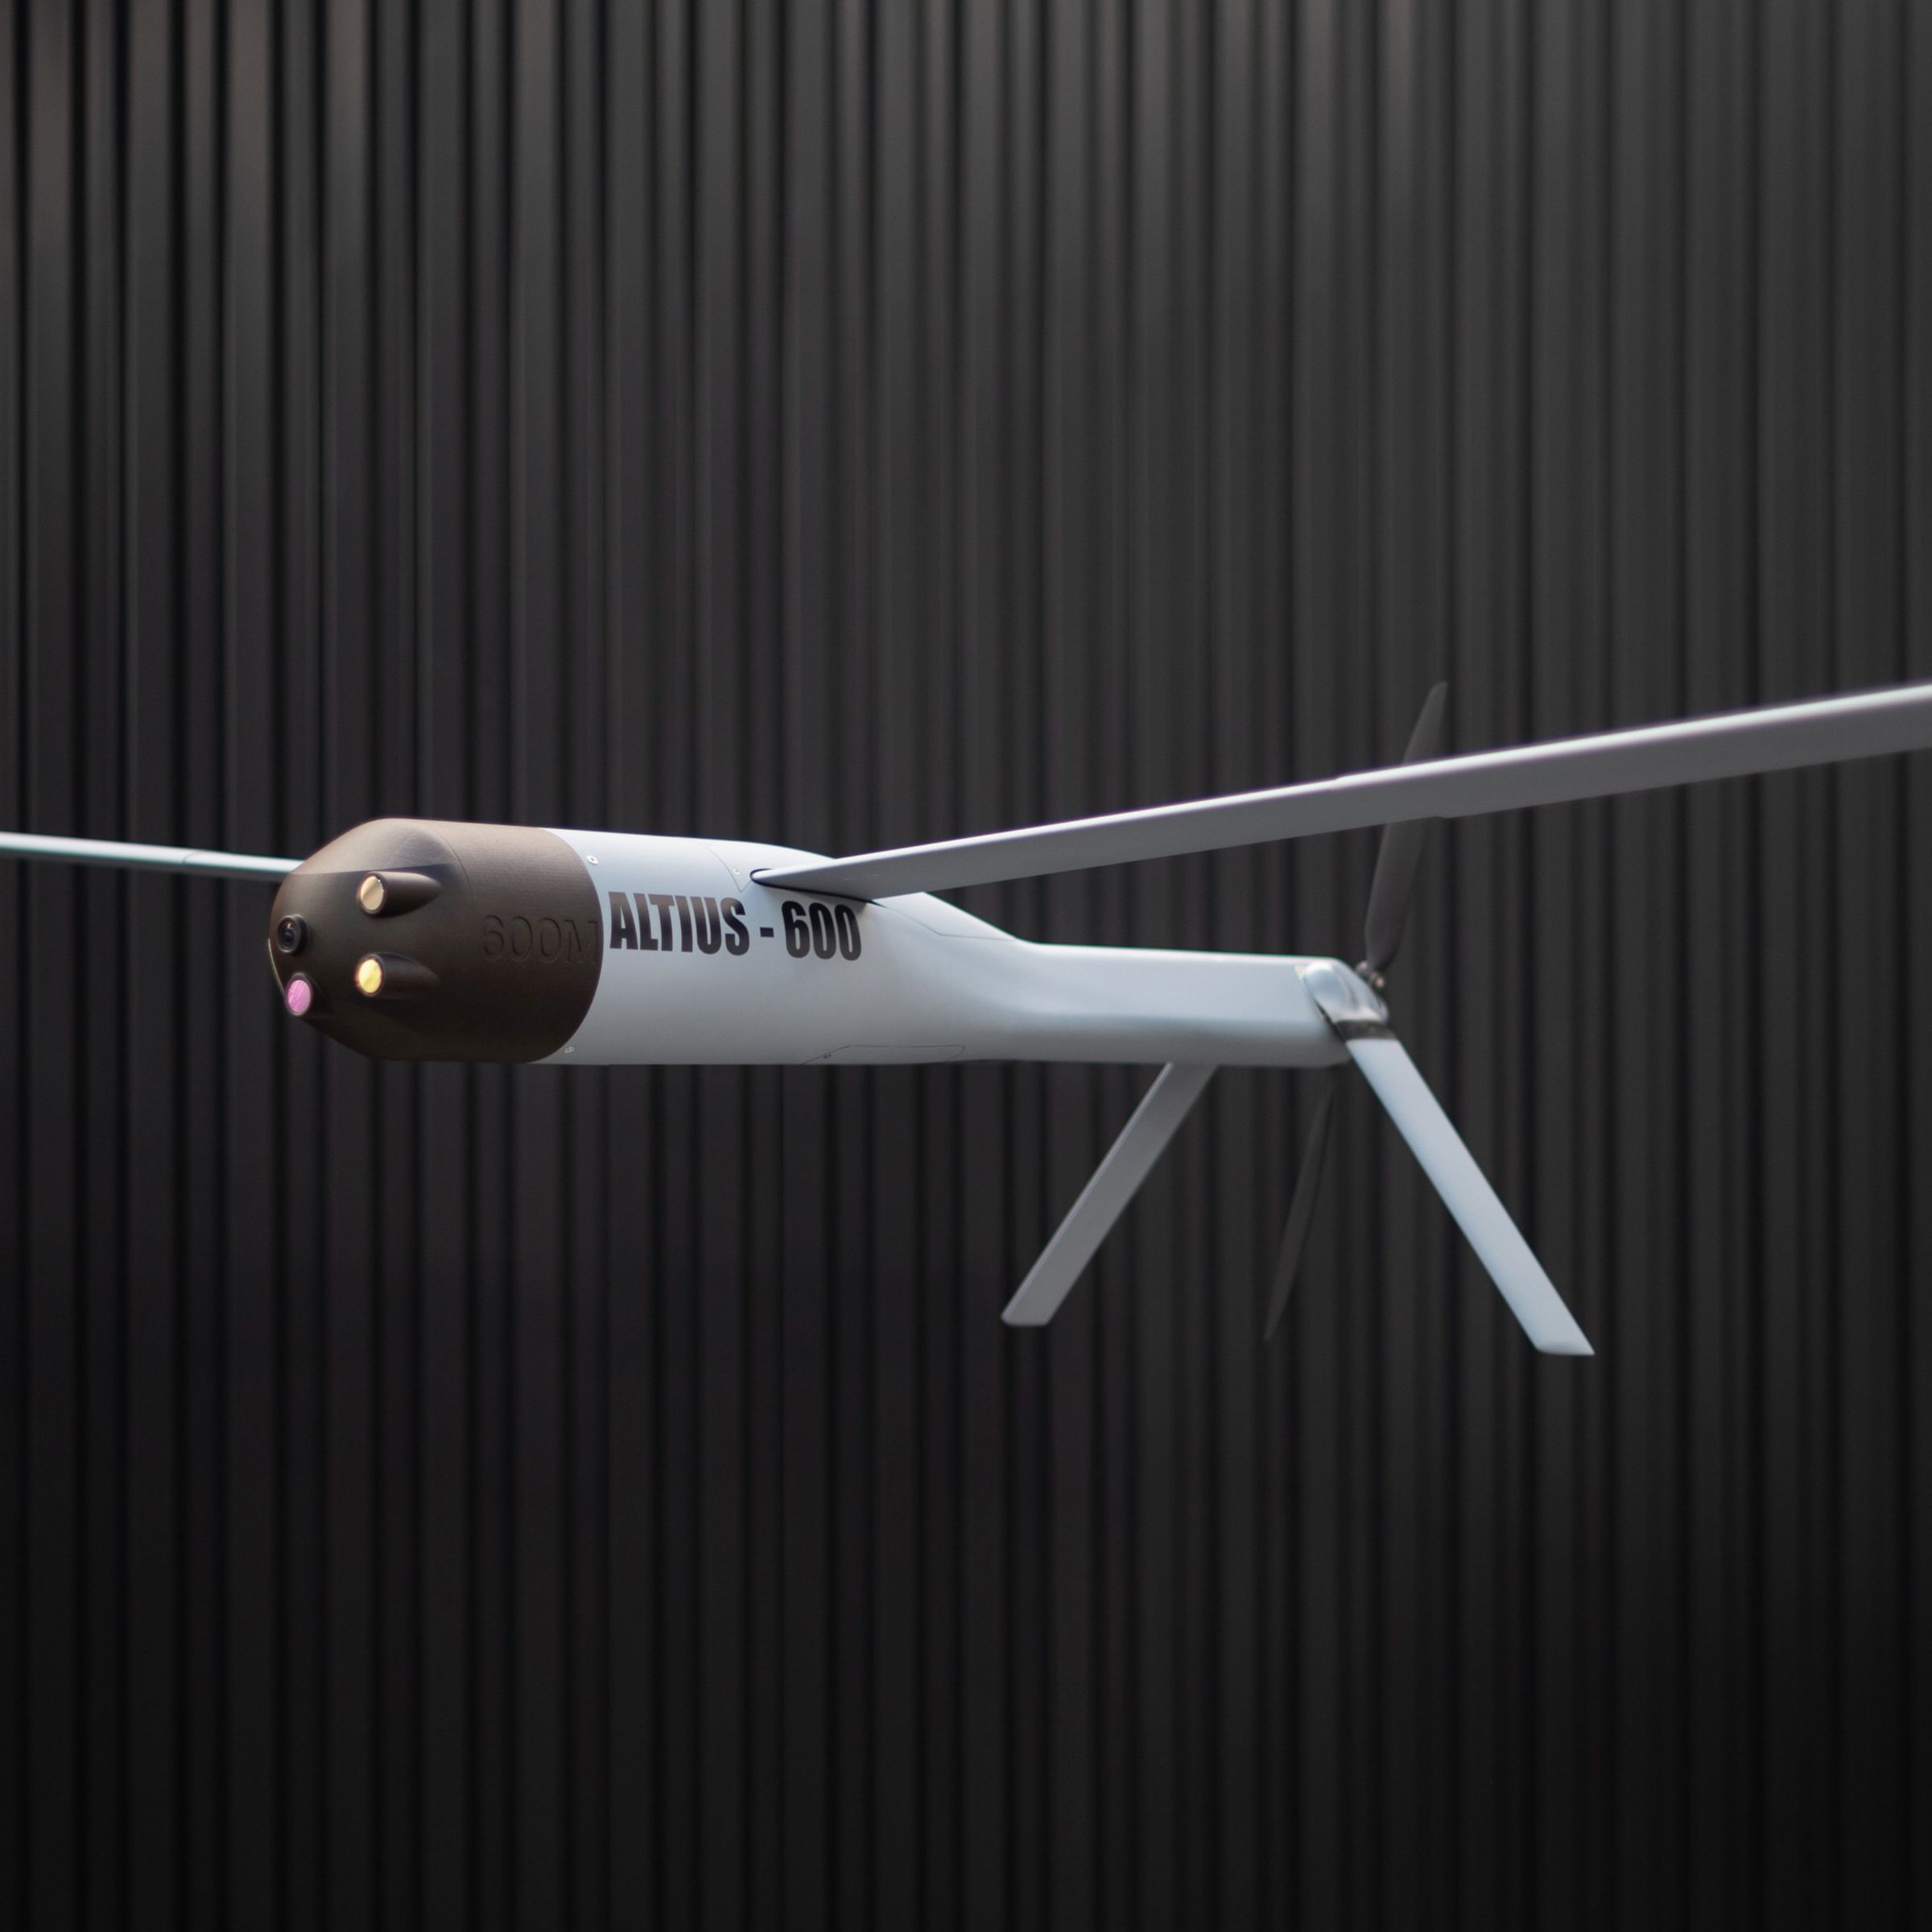 An image of a fixed-wing drone aircraft.